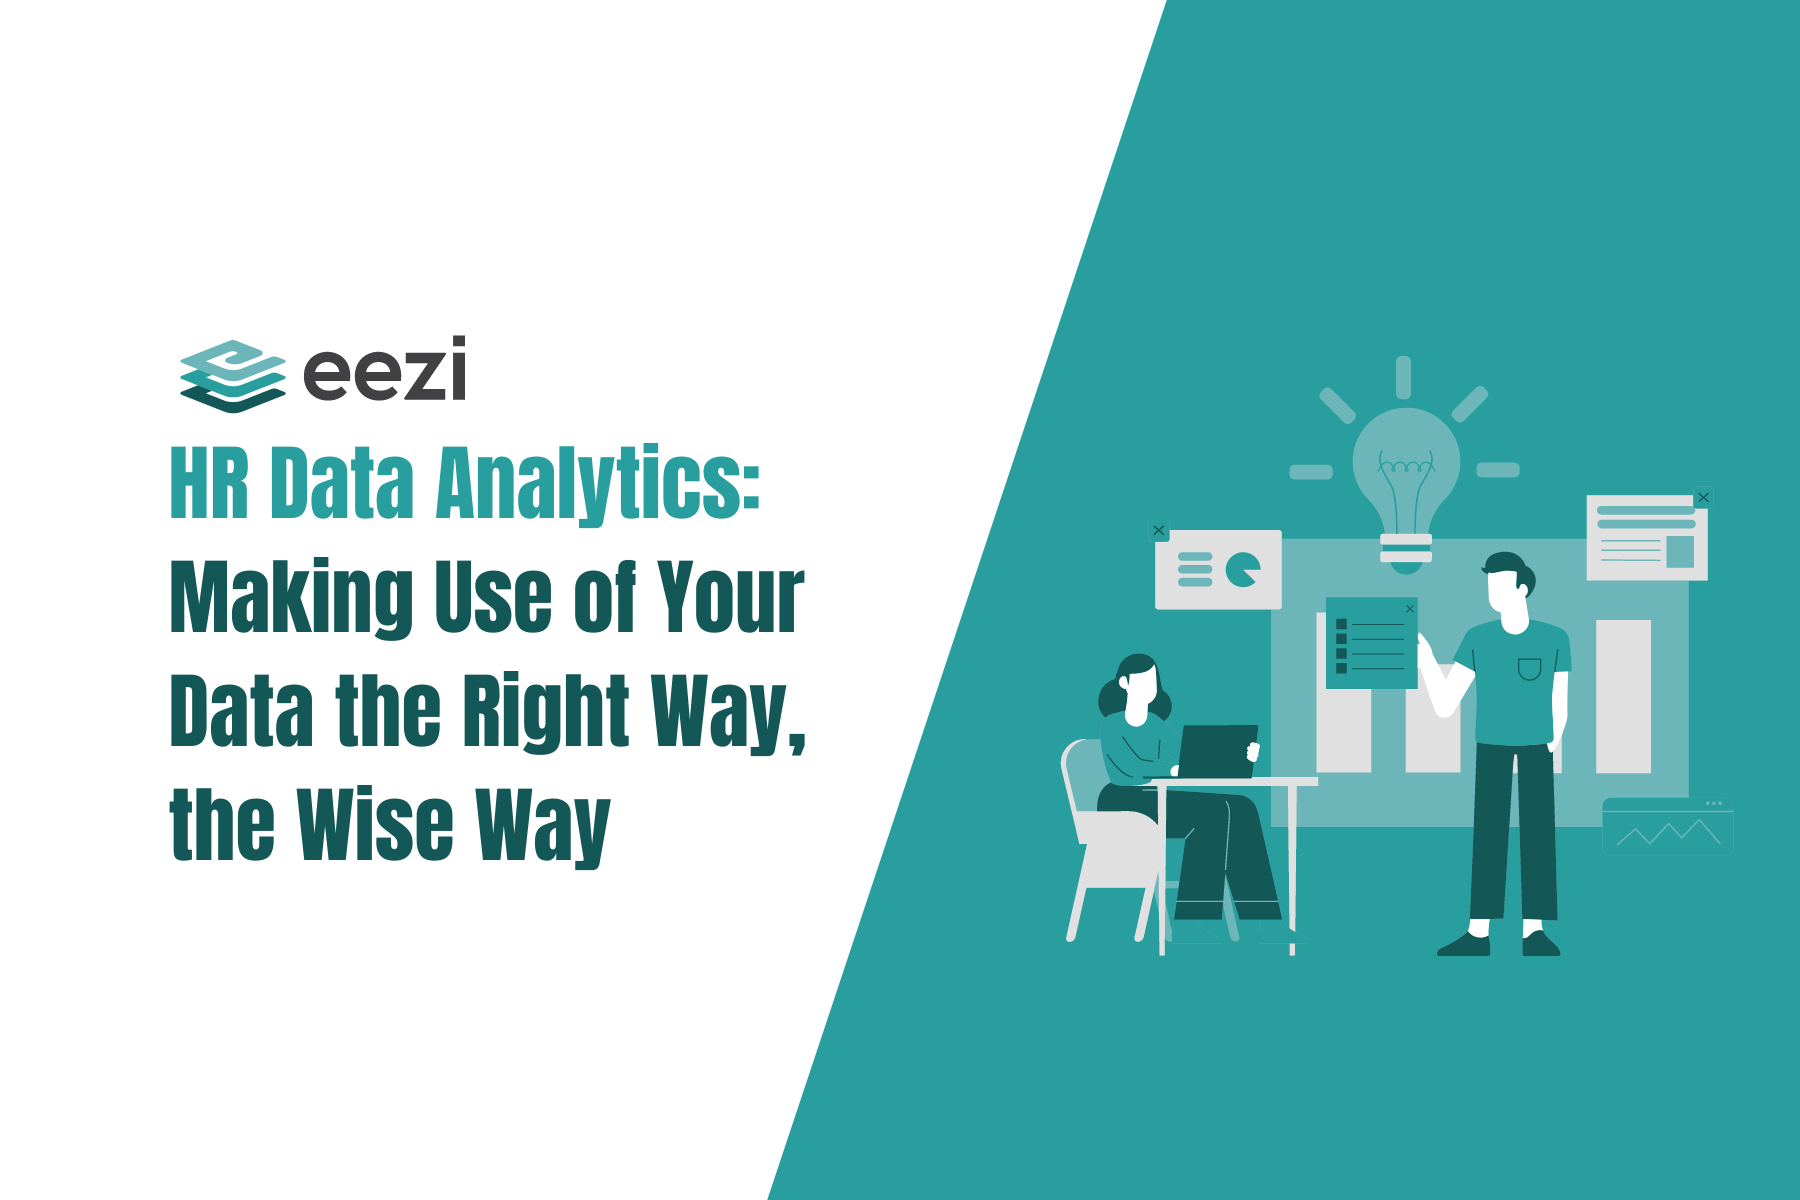 HR Data Analytics Making Use of Your Data the Right Way, the Wise Way